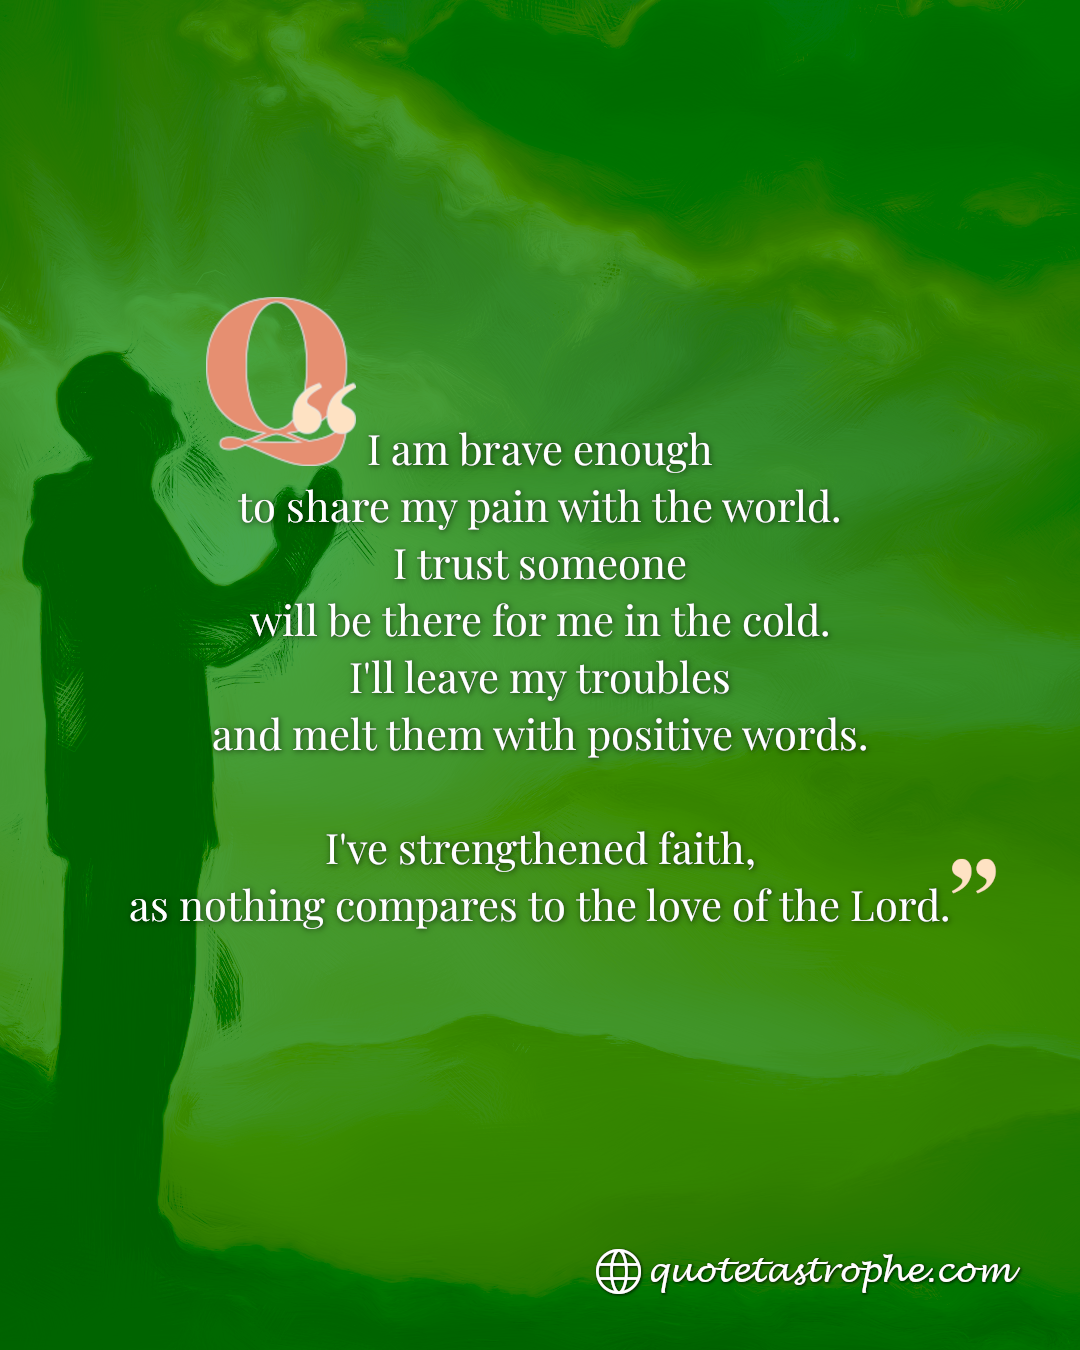 Strengthen Faith as Nothing Compares to the Love of the Lord